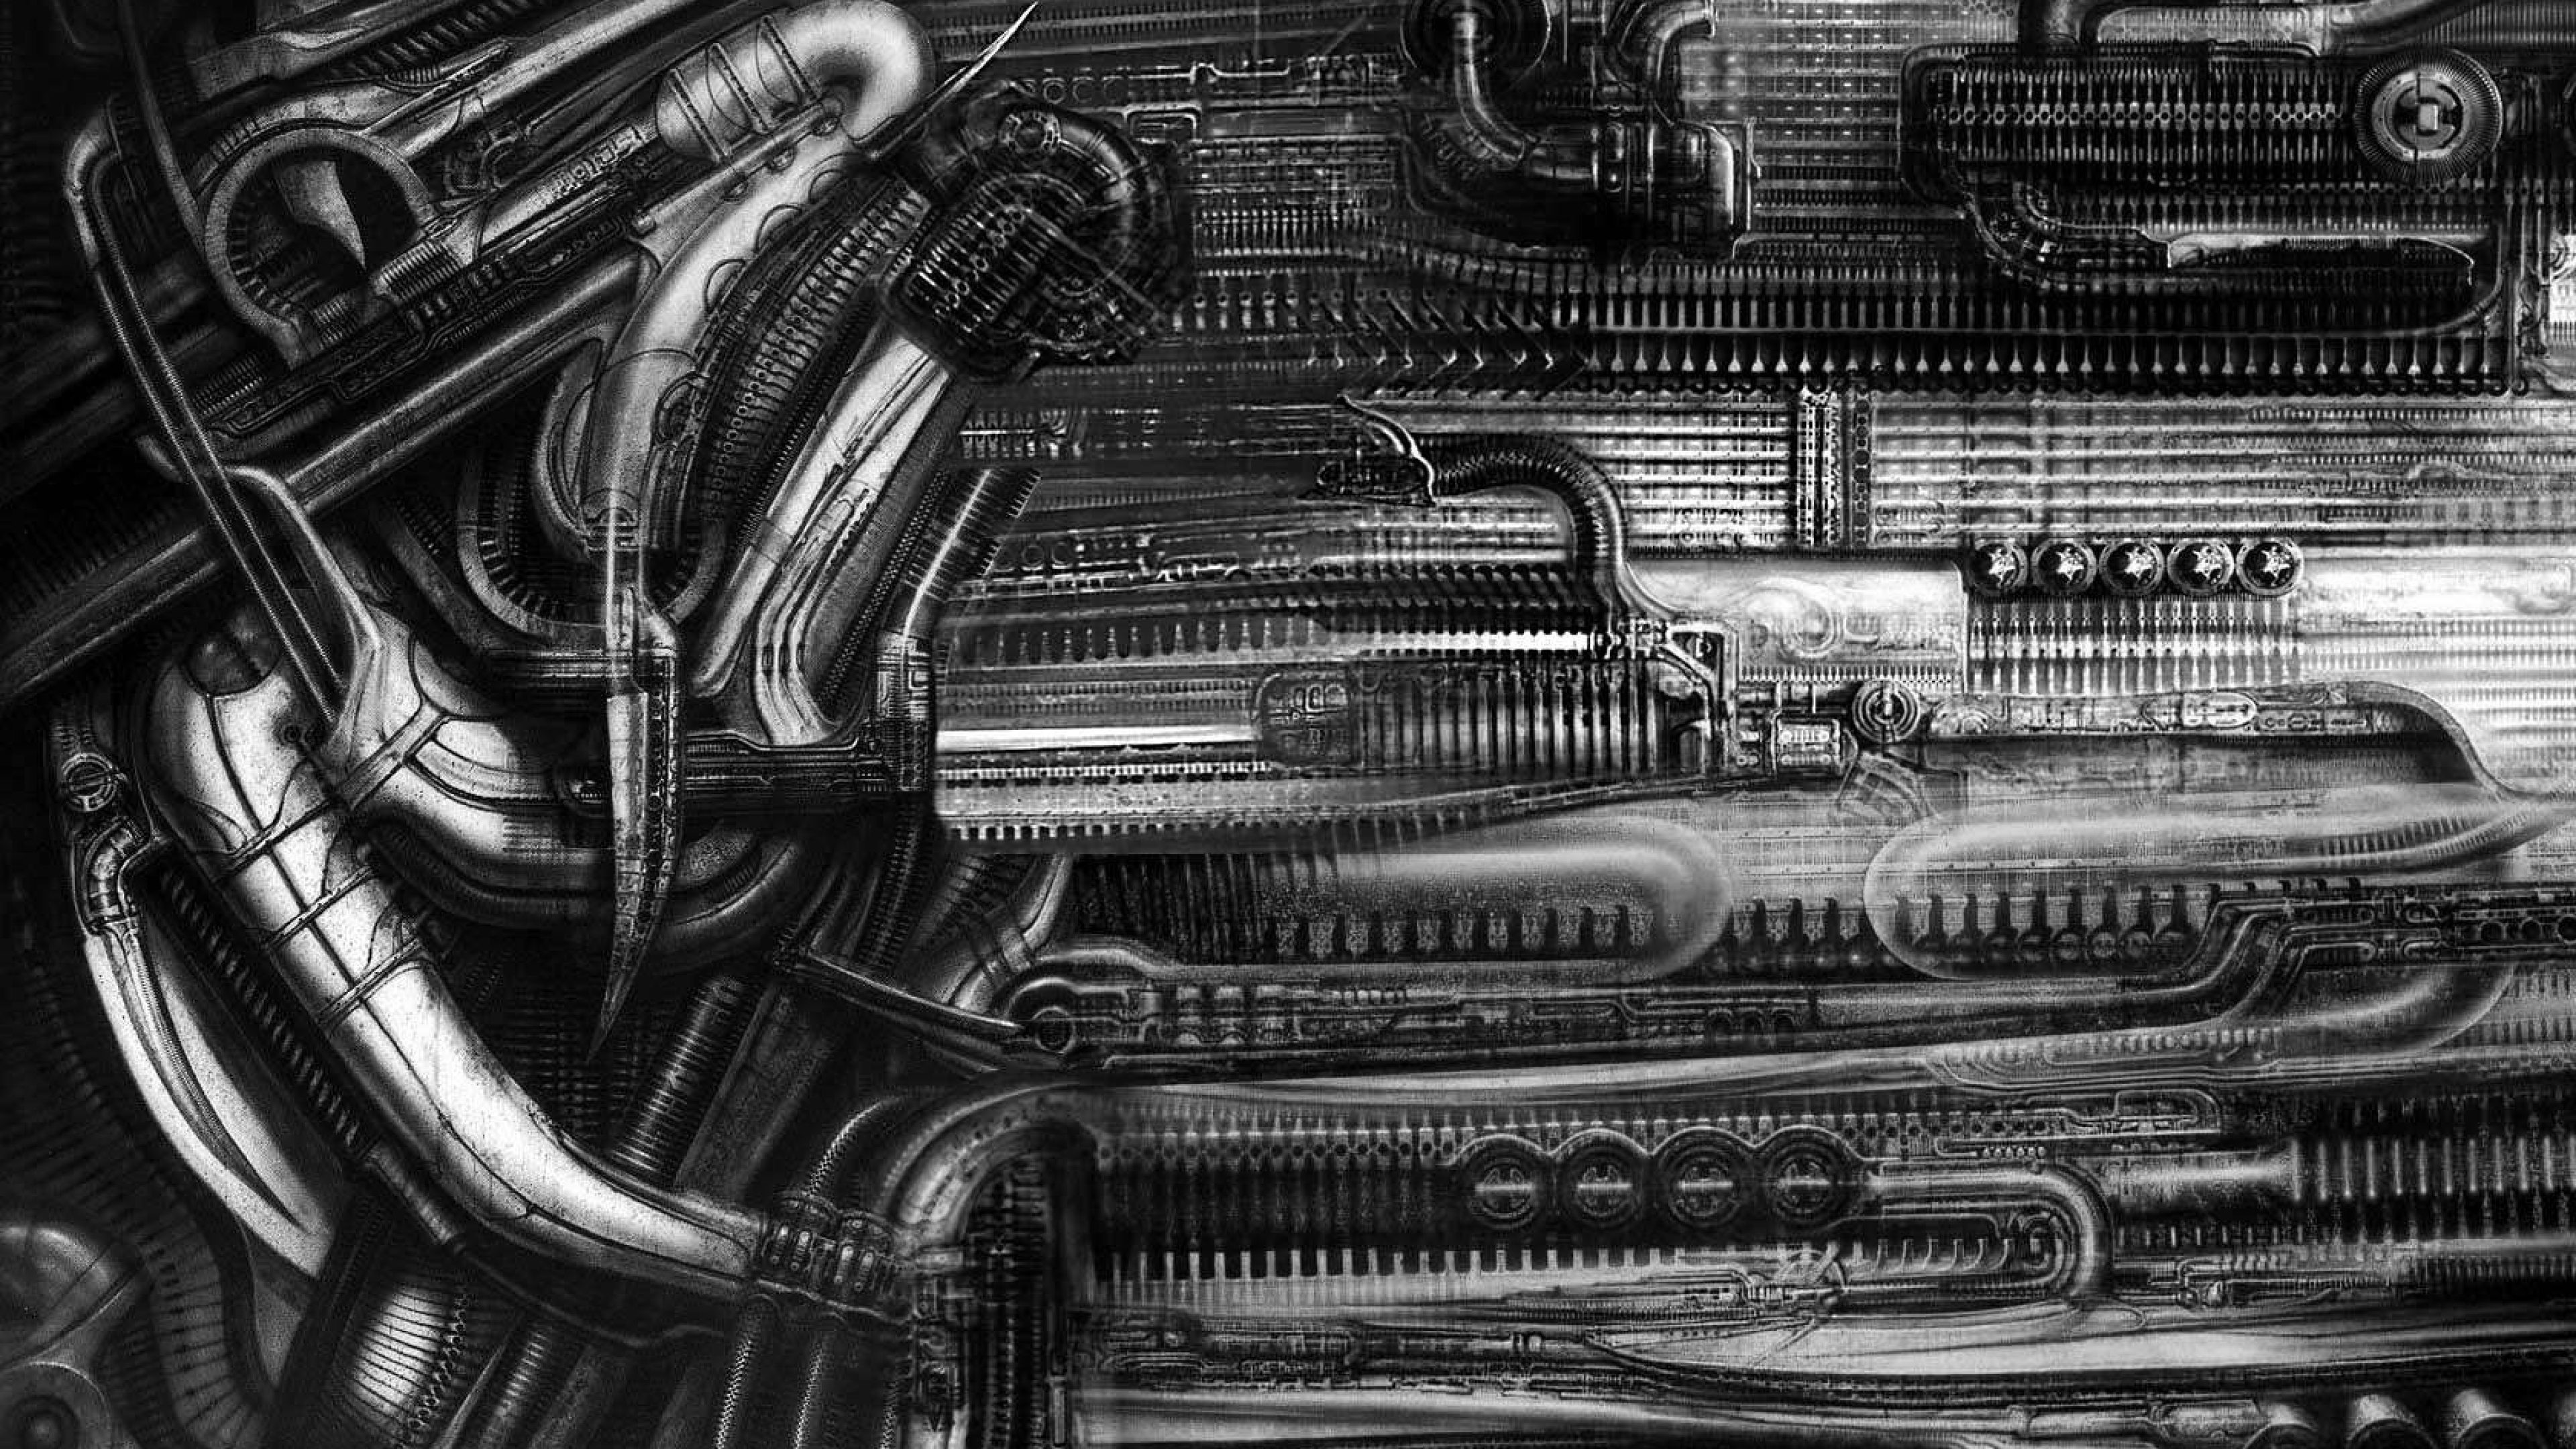 giger wallpaper,monochrome,pipe,black and white,metal,auto part